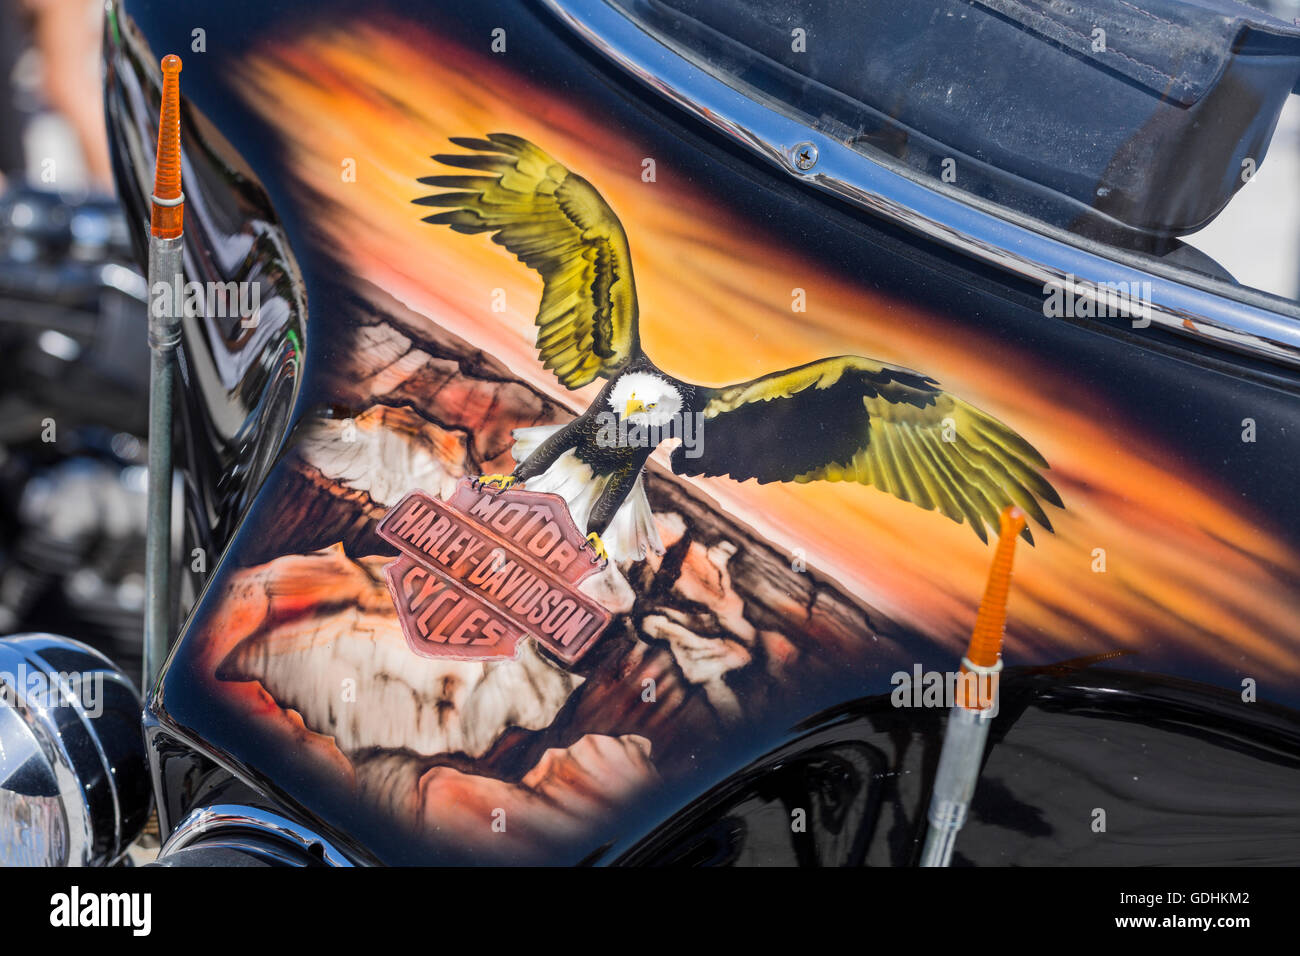 Custom Paint Job On A Harley Davidson At The American Cars And Motorcycles Gathering In The Plaza De La Basilica De Candelaria Tenerife Stock Photo Alamy